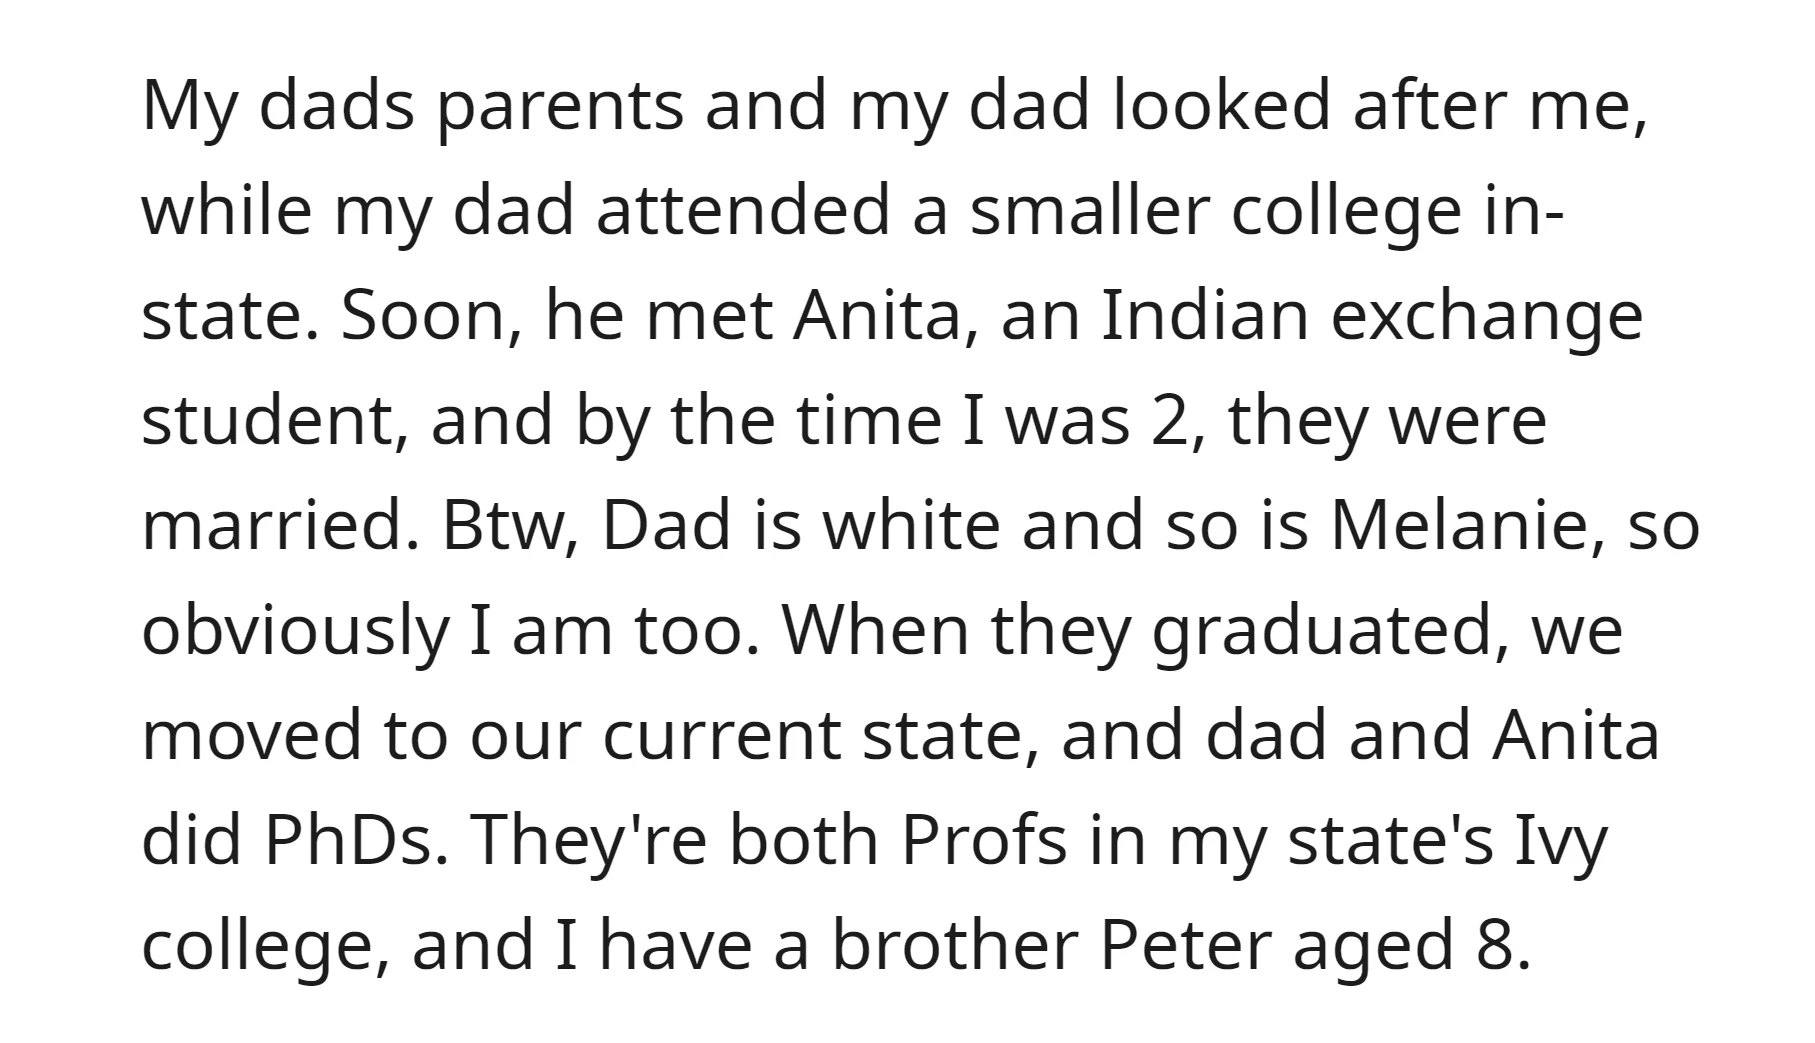 OP's paternal grandparents cared for them while his dad attended a local college, later his dad married another woman